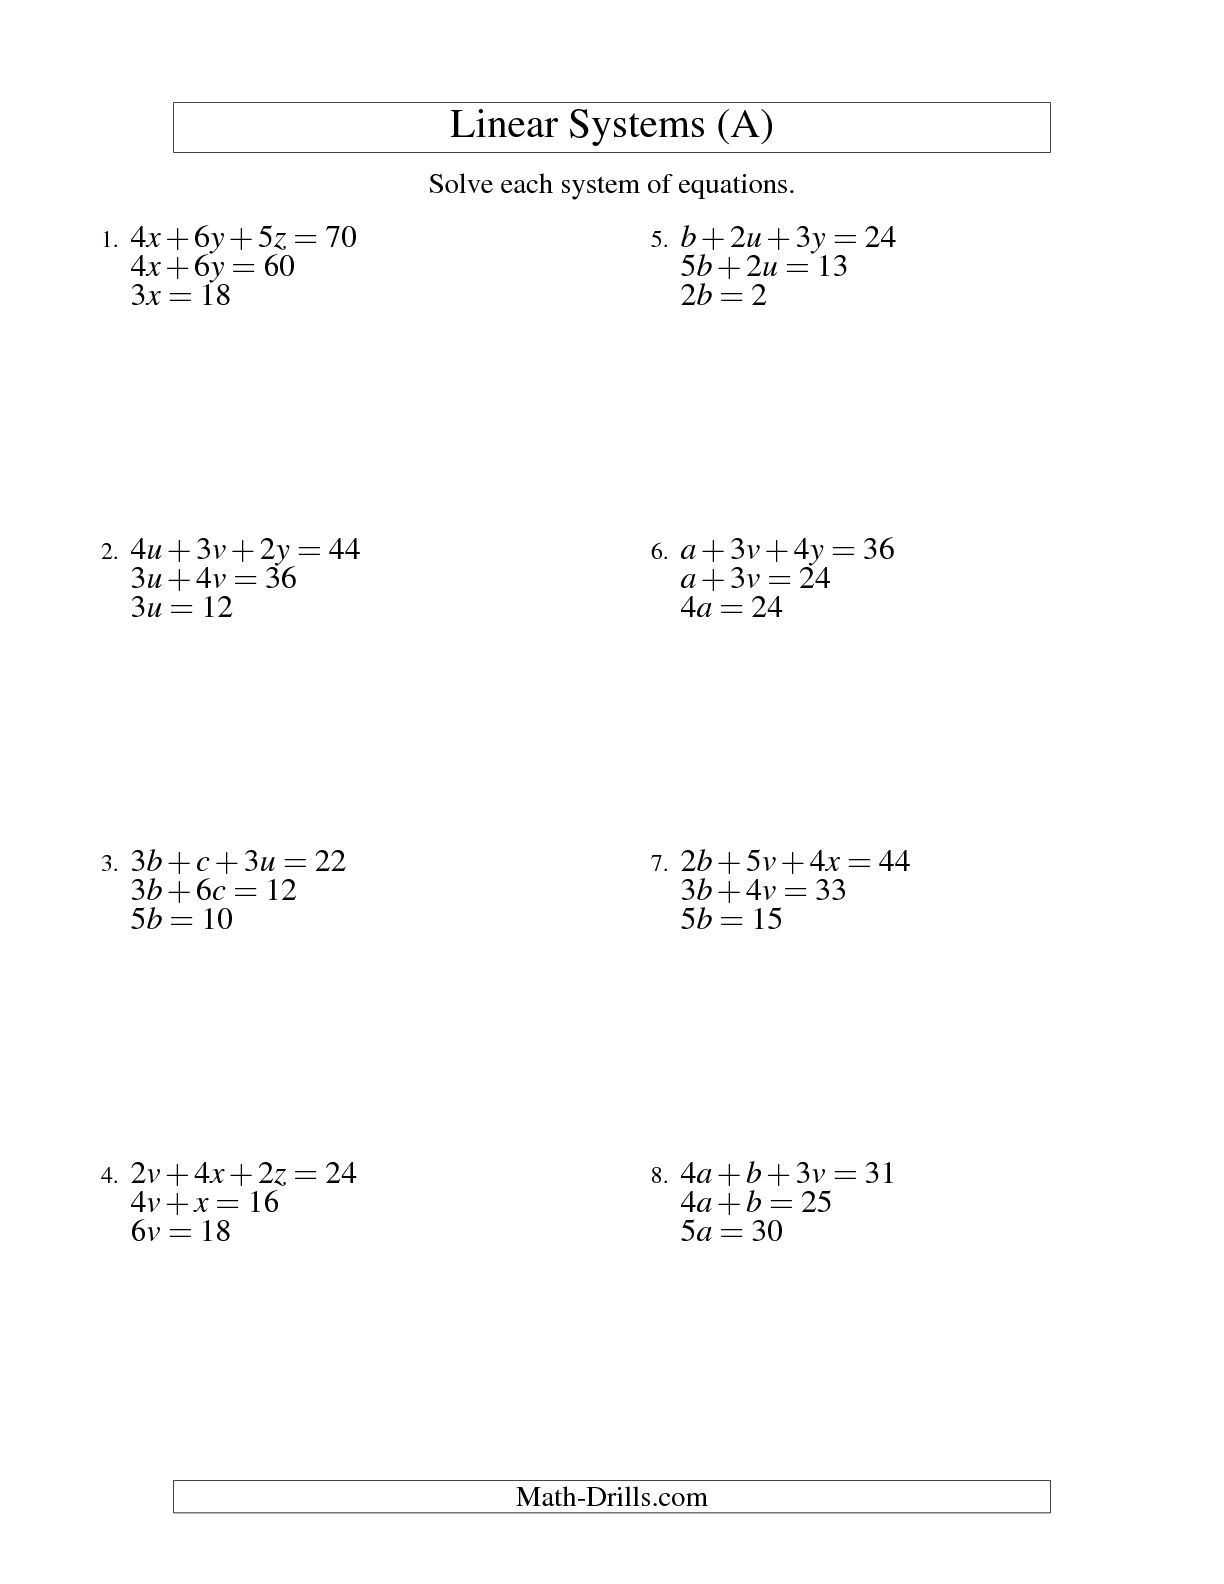 Solving Systems Of Equations Word Problems Worksheet Answer Key together with System Equations Word Problems Geometry Inspirationa solving